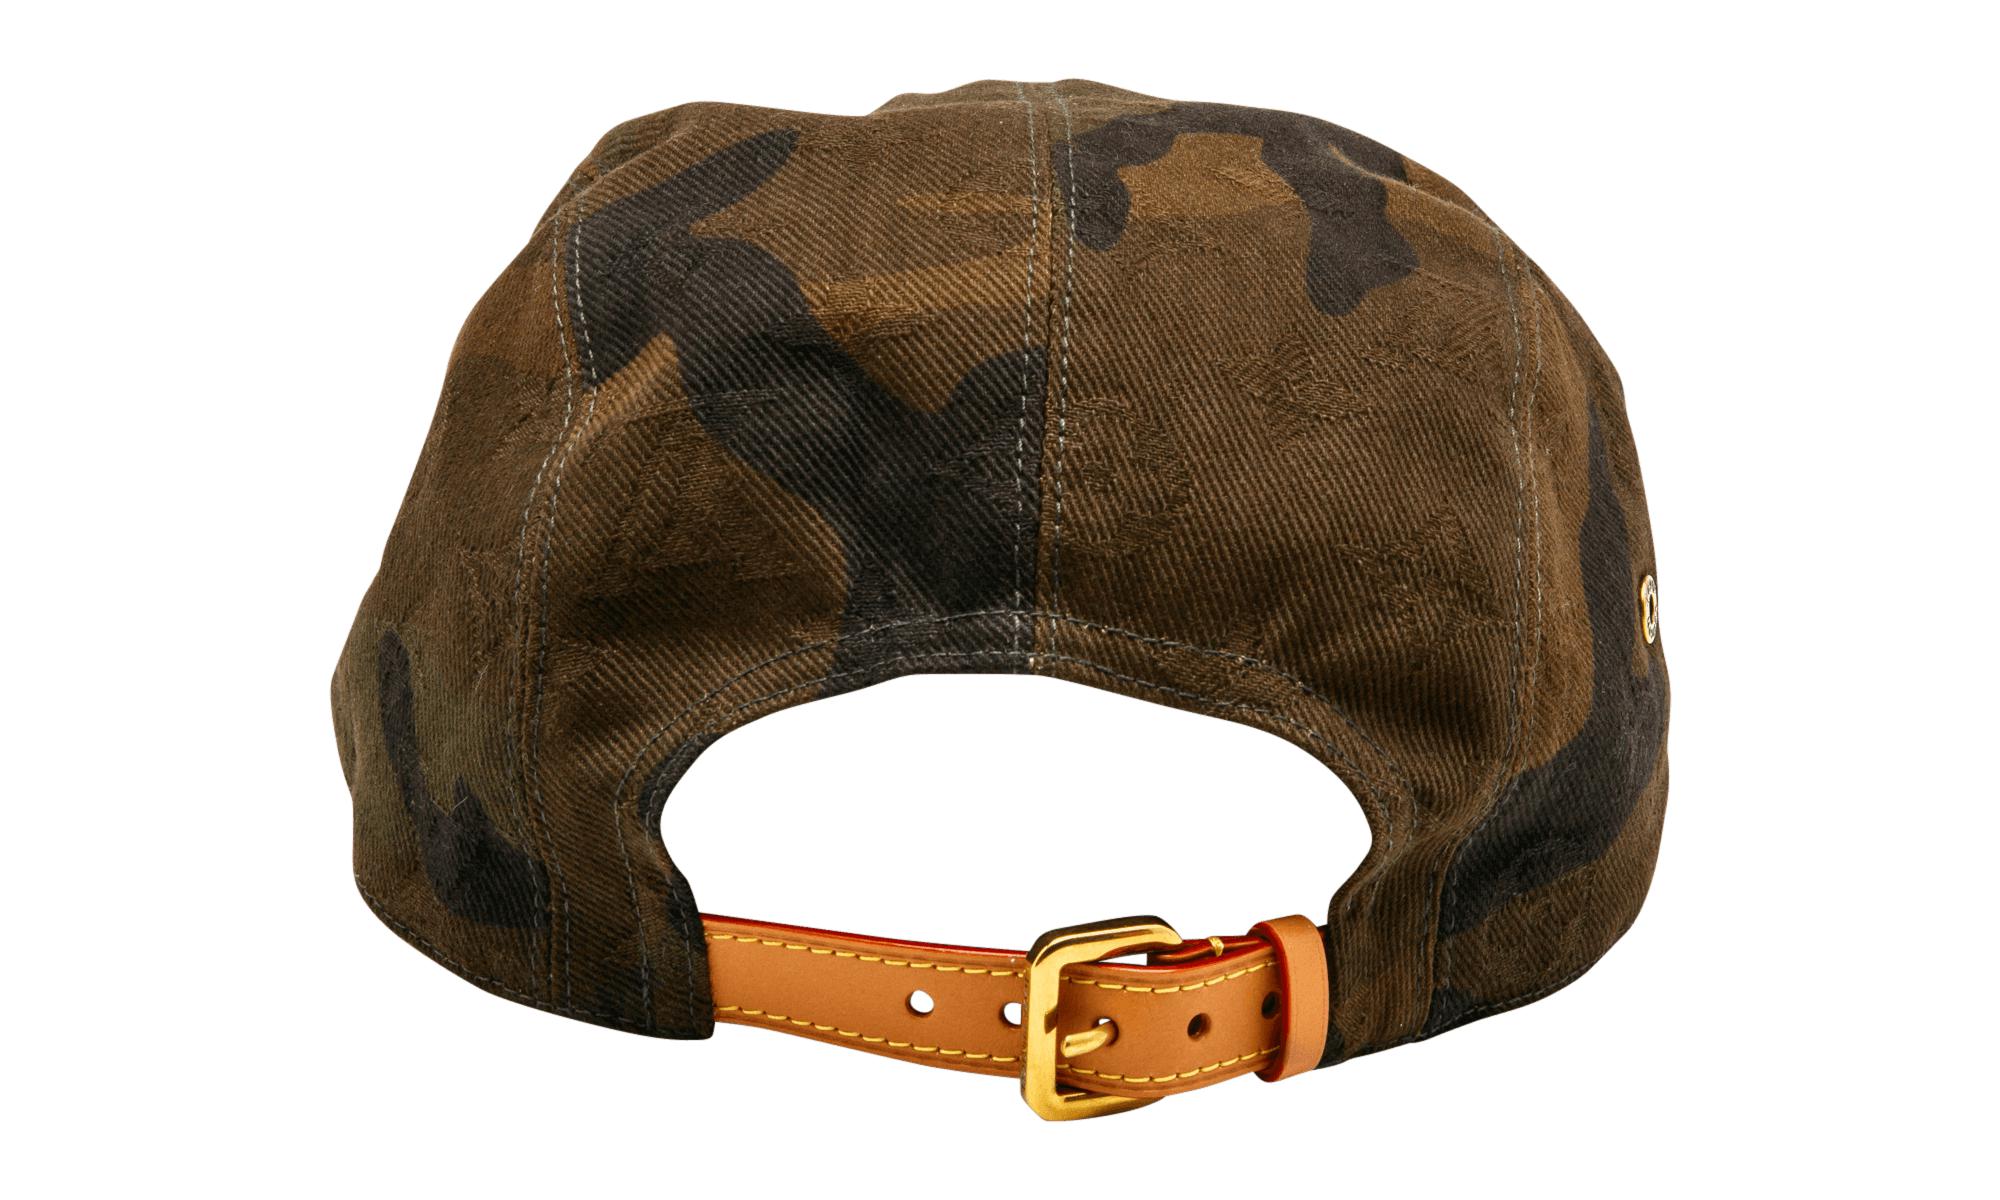 Louis Vuitton 5 Panel Camouflage Cap in Brown for Men - Lyst